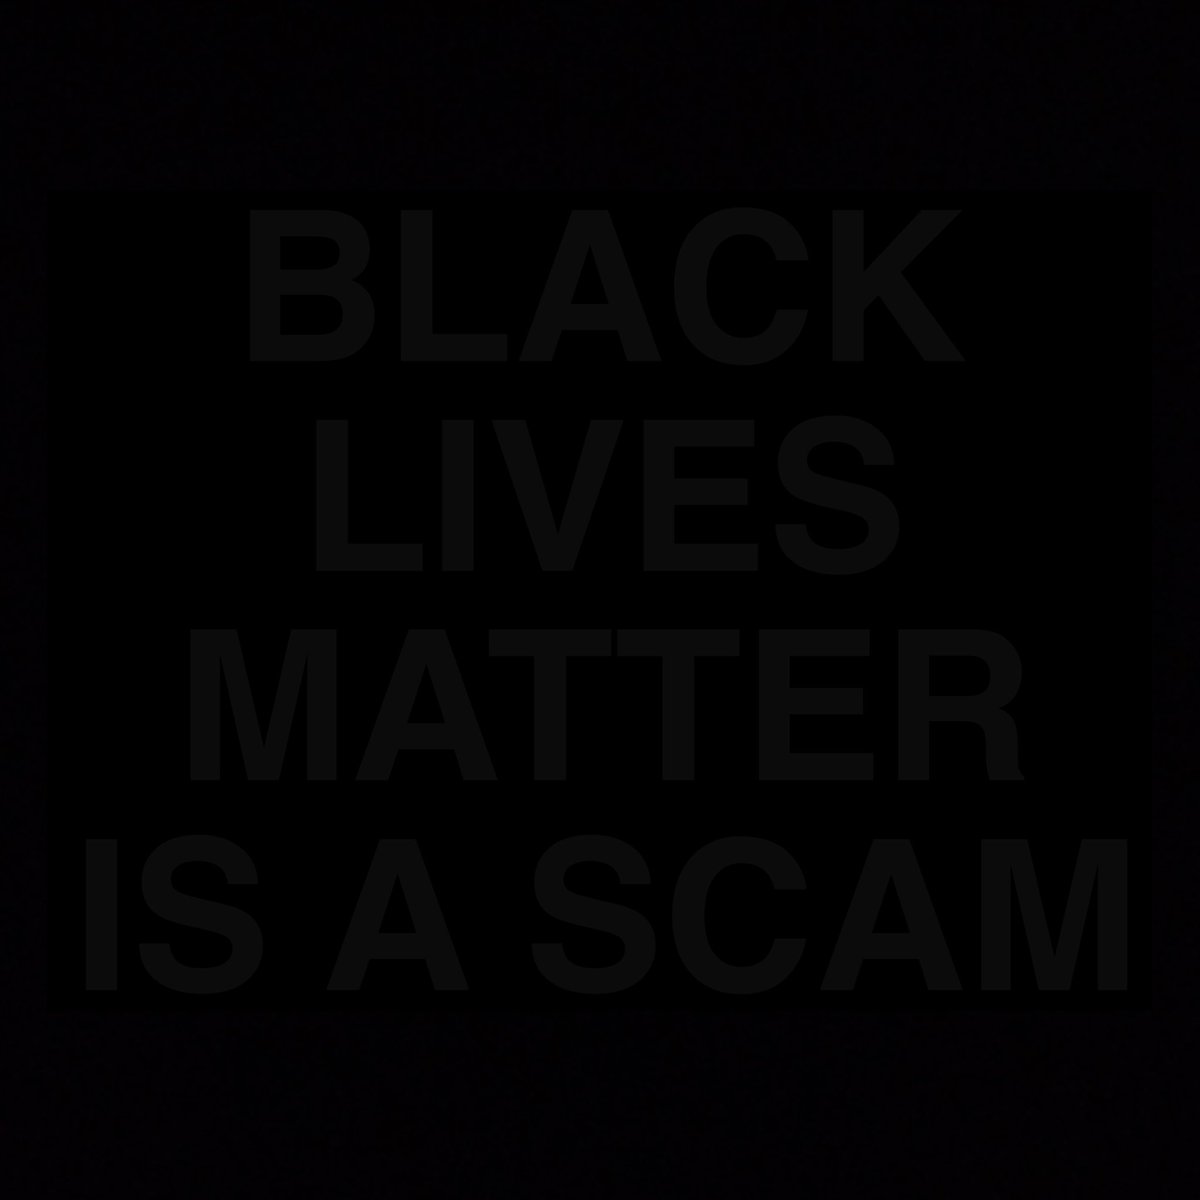 Three years ago today, virtue signaling turned into an Olympic sport on #BlackoutTuesday. BLM witch-hunted anyone who didn’t comply and pander to the fraudulent police brutality narrative.

In retrospect, here’s a list of positive accomplishments from the BLM movement:

1. 
2.
3.